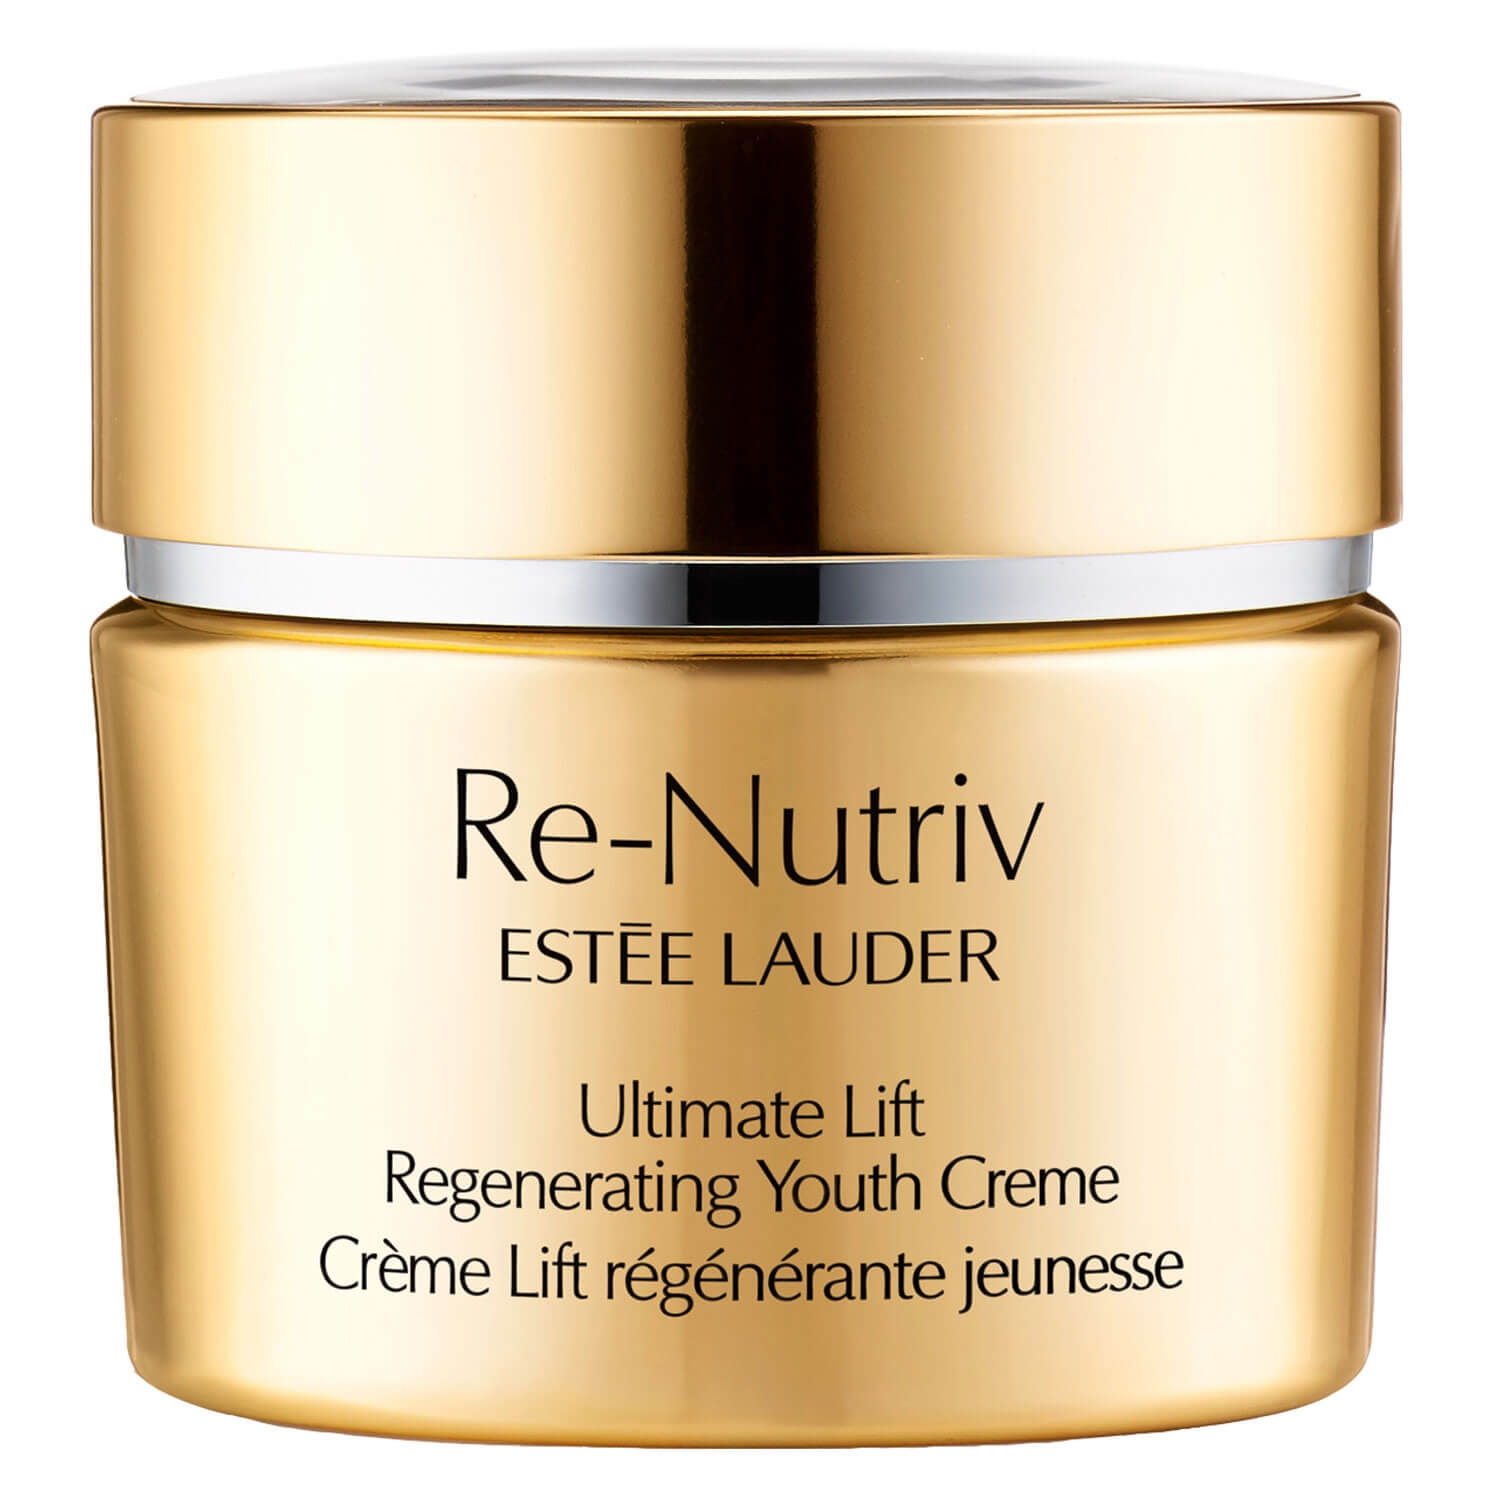 Product image from Re-Nutriv - Ultimate Lift Regenerating Youth Creme